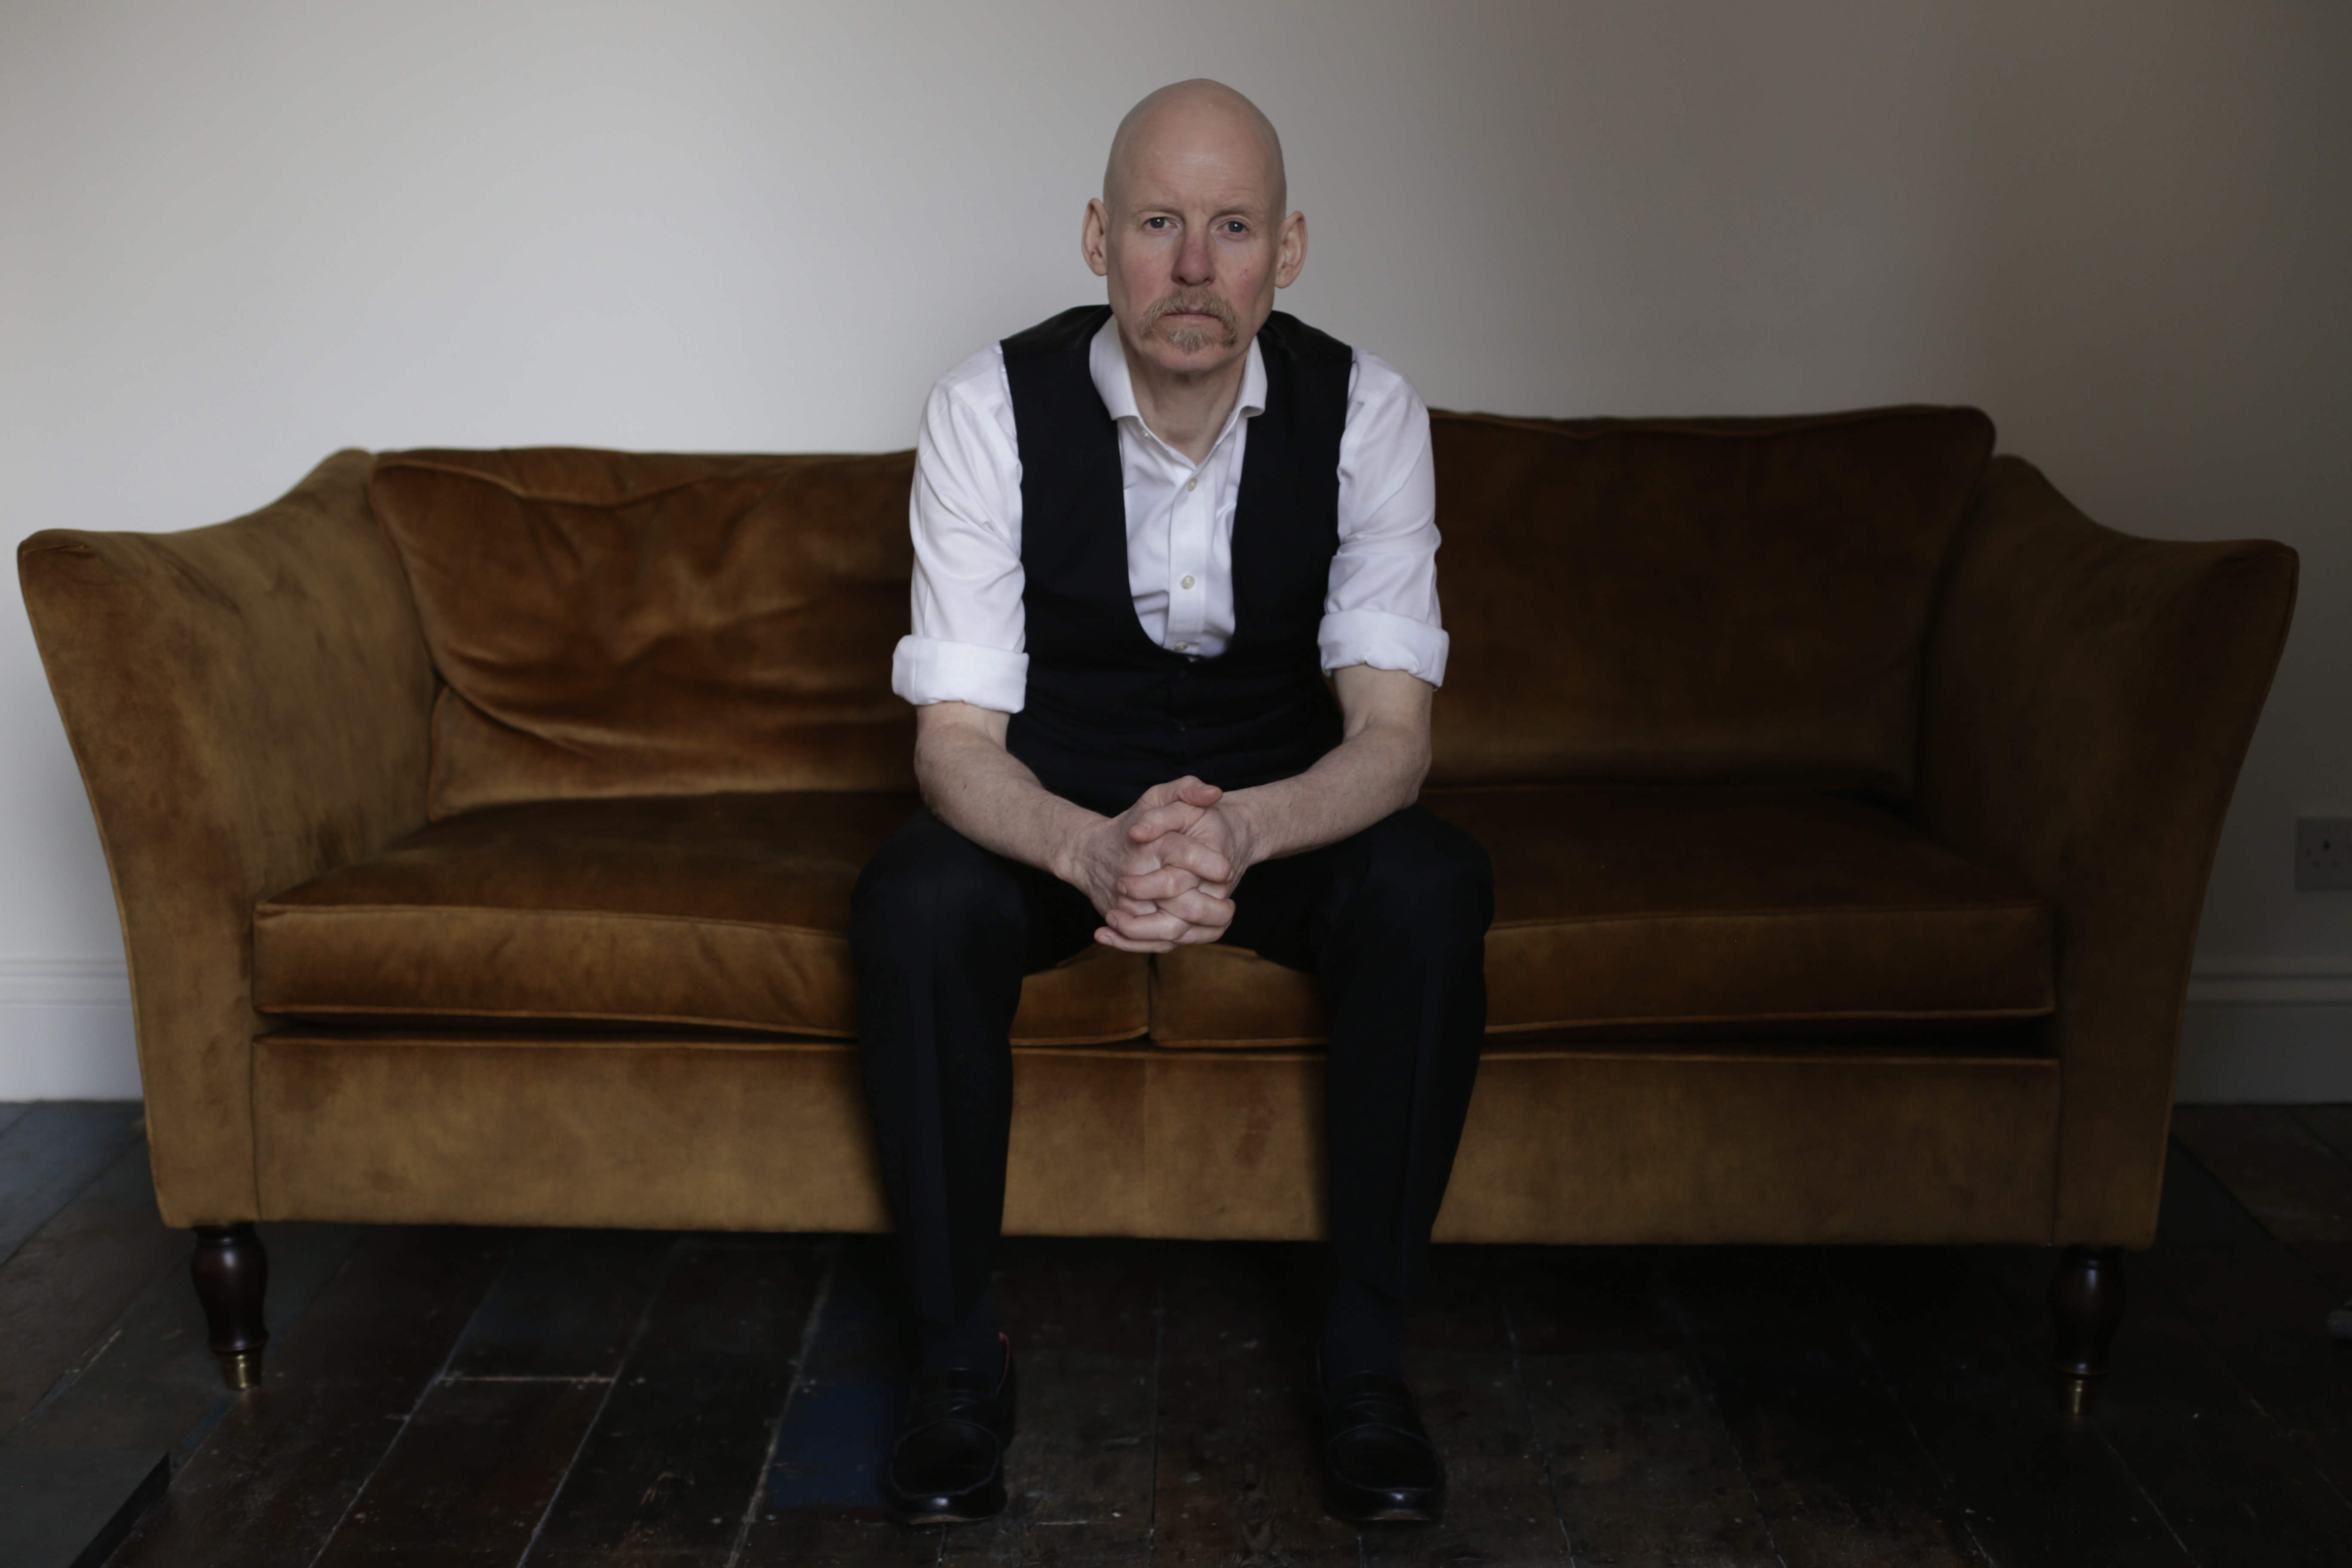 Prolific Singer-Songwriter And Poet Martin Wardley Releases Timely Reminder to ‘Make This Count’ in New Thought Provoking Video. 